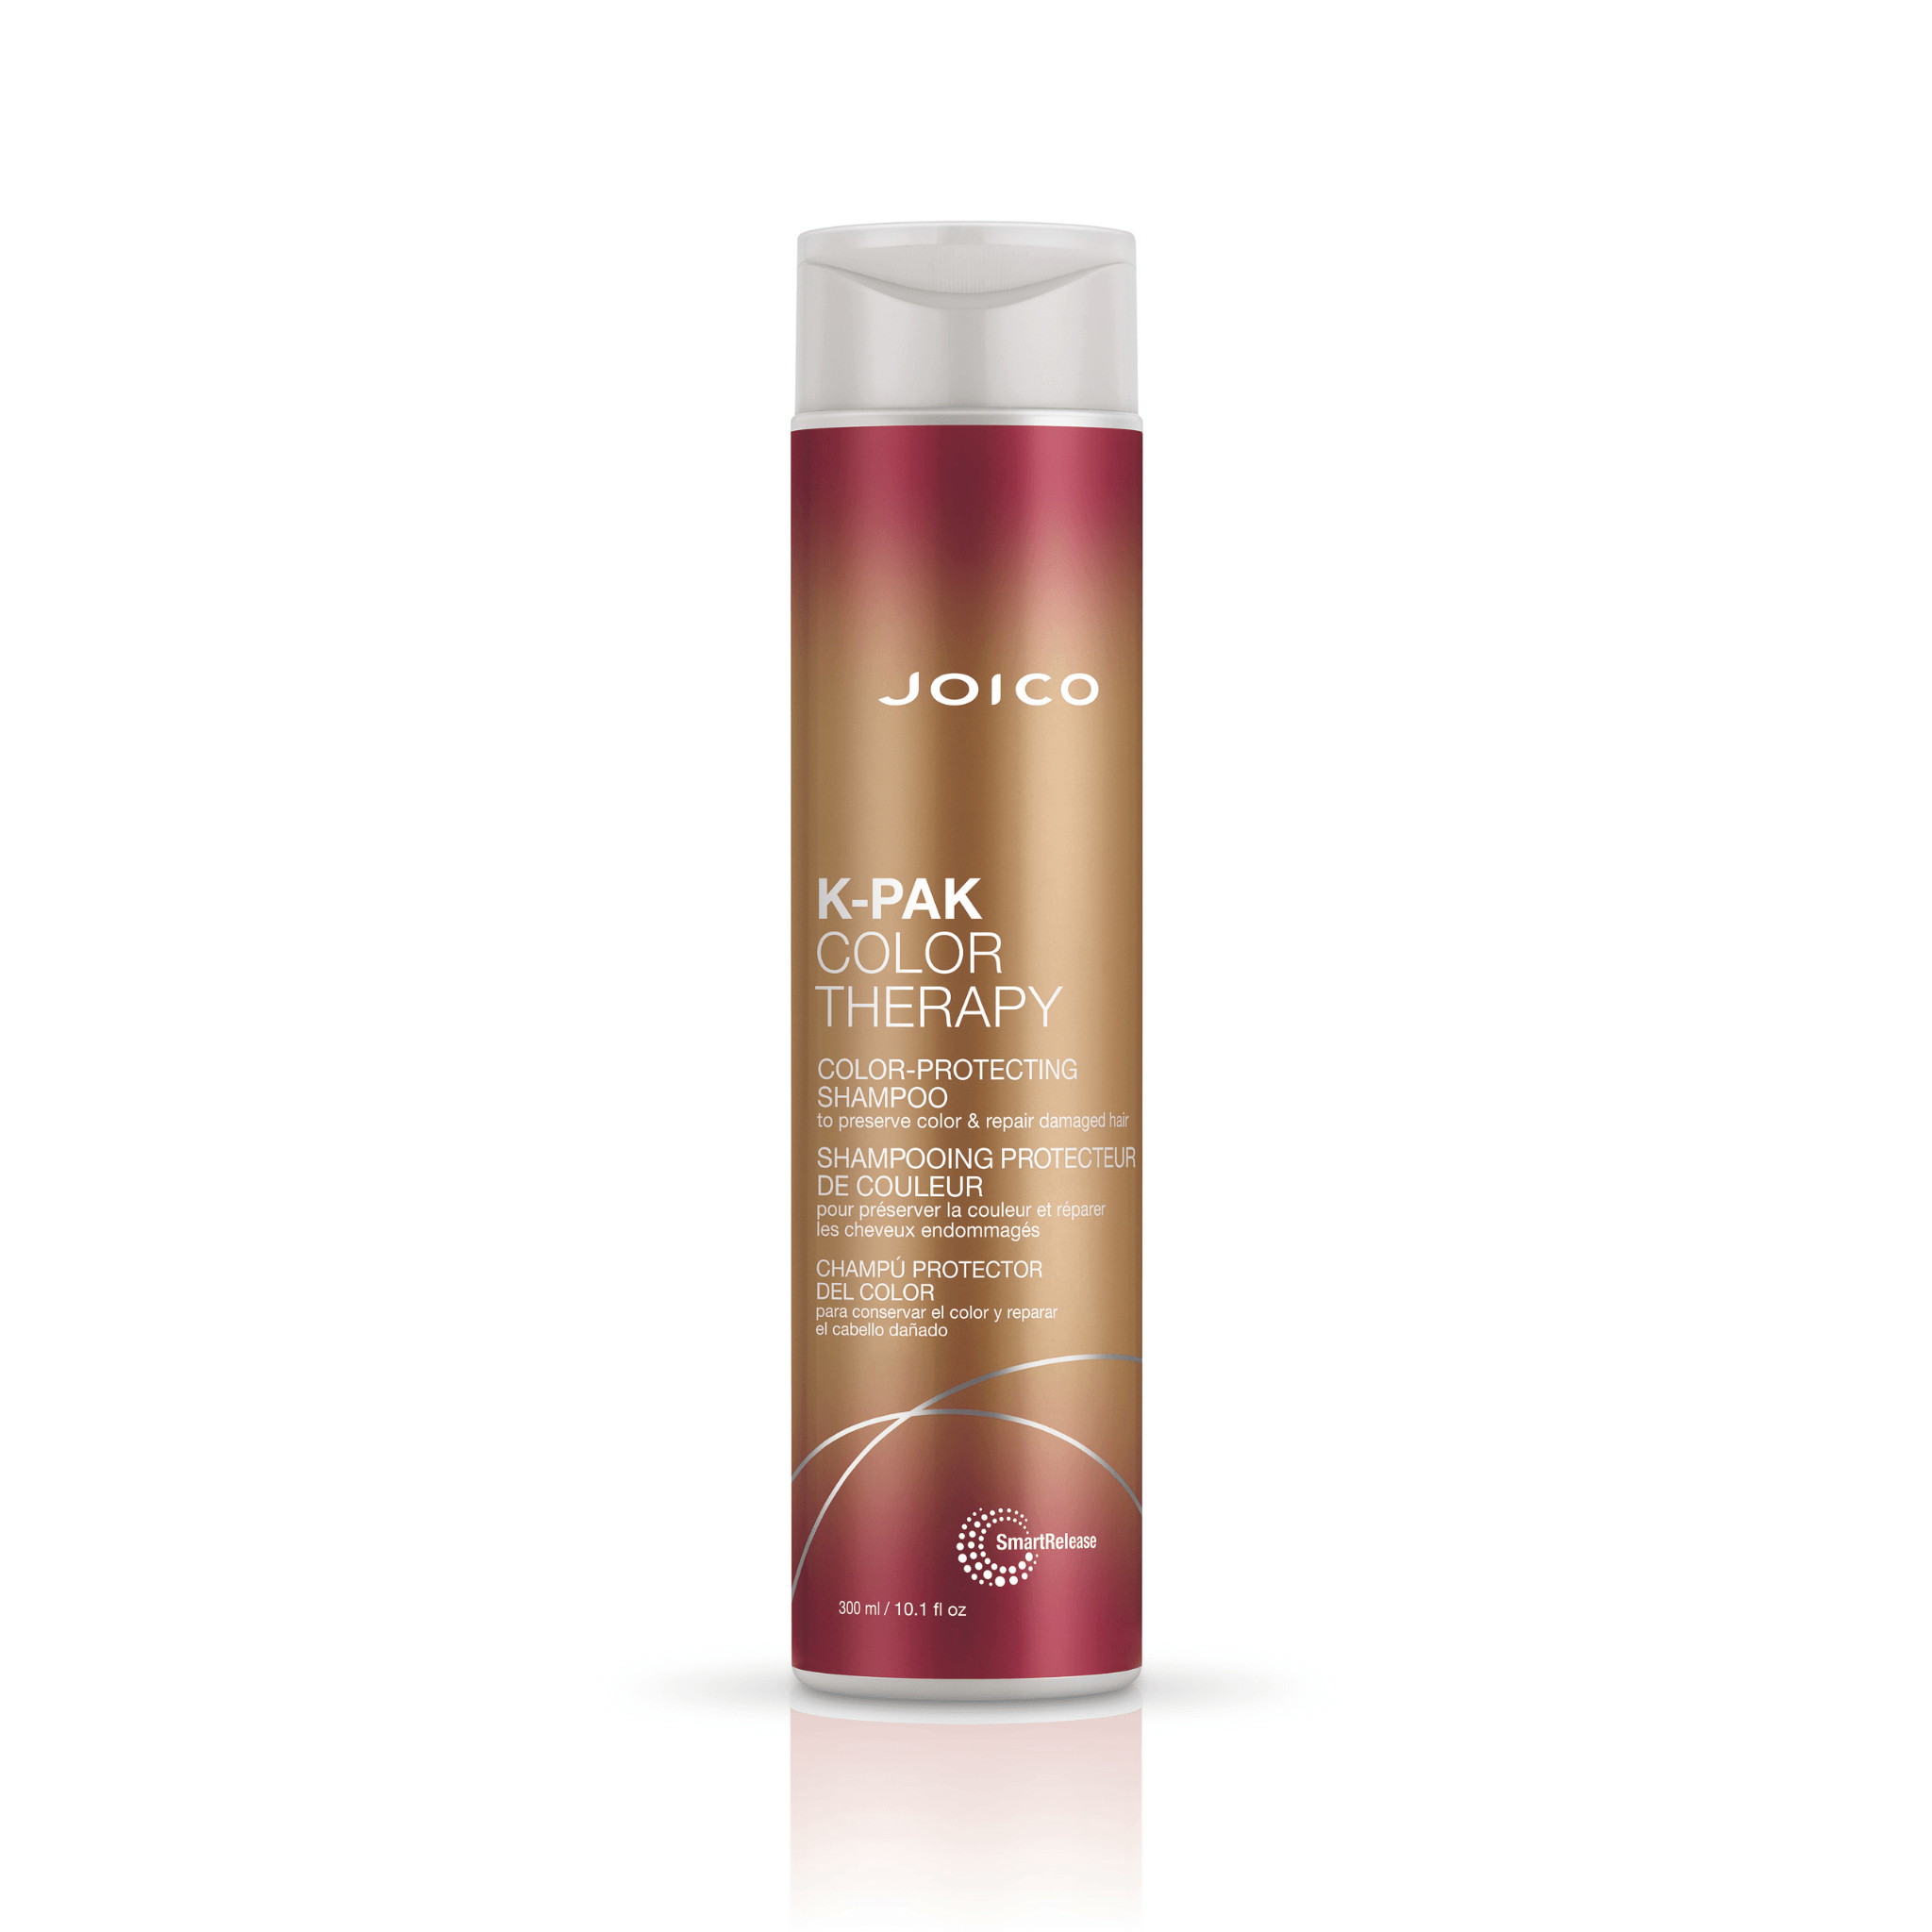 Joico. Shampoing K-Pak Color Therapy - 300ml - Concept C. Shop